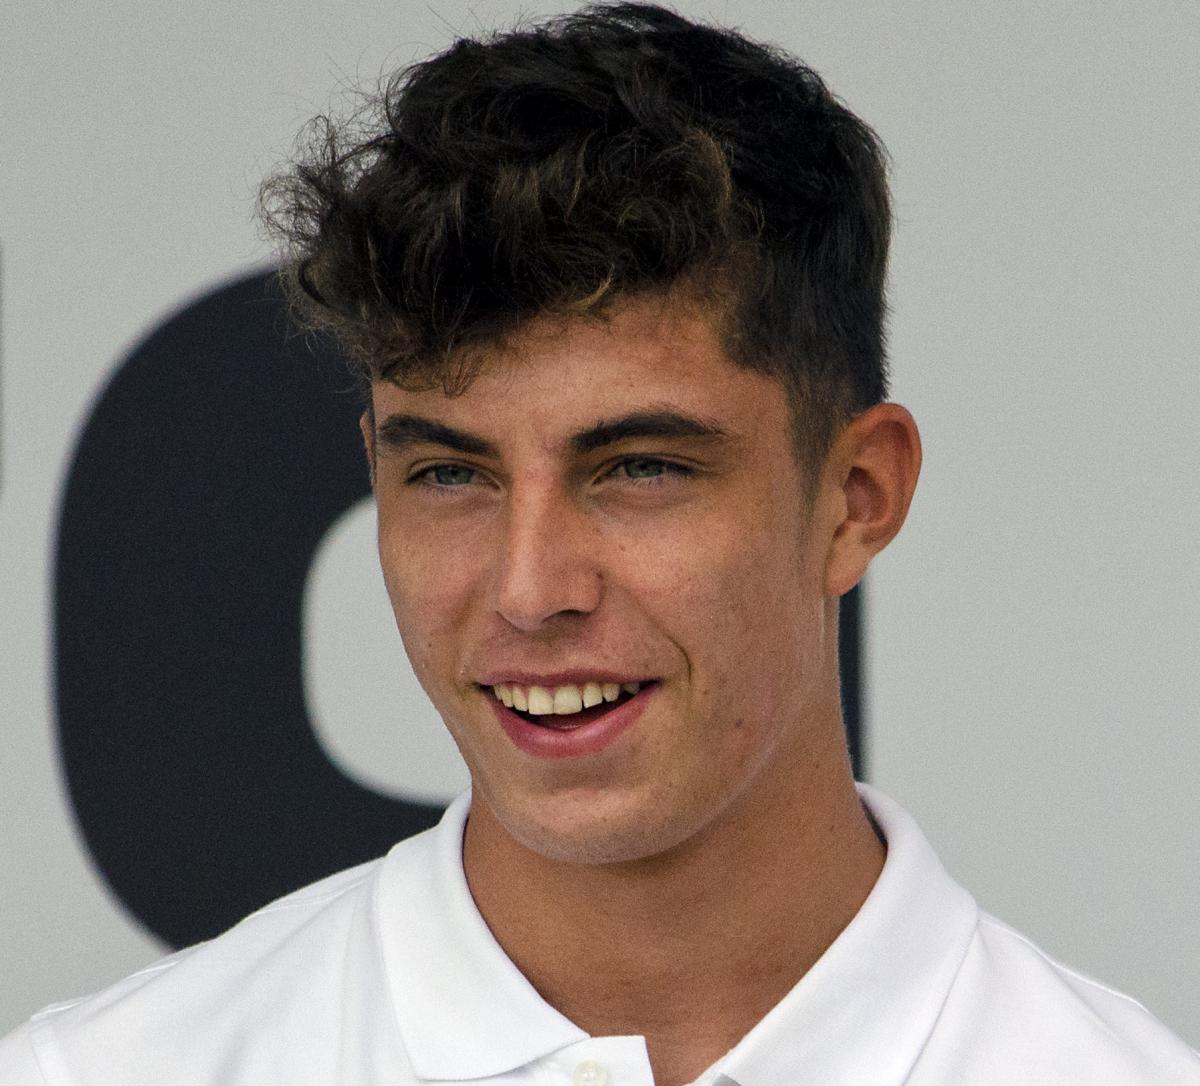 10 things you may not know about Kai Havertz